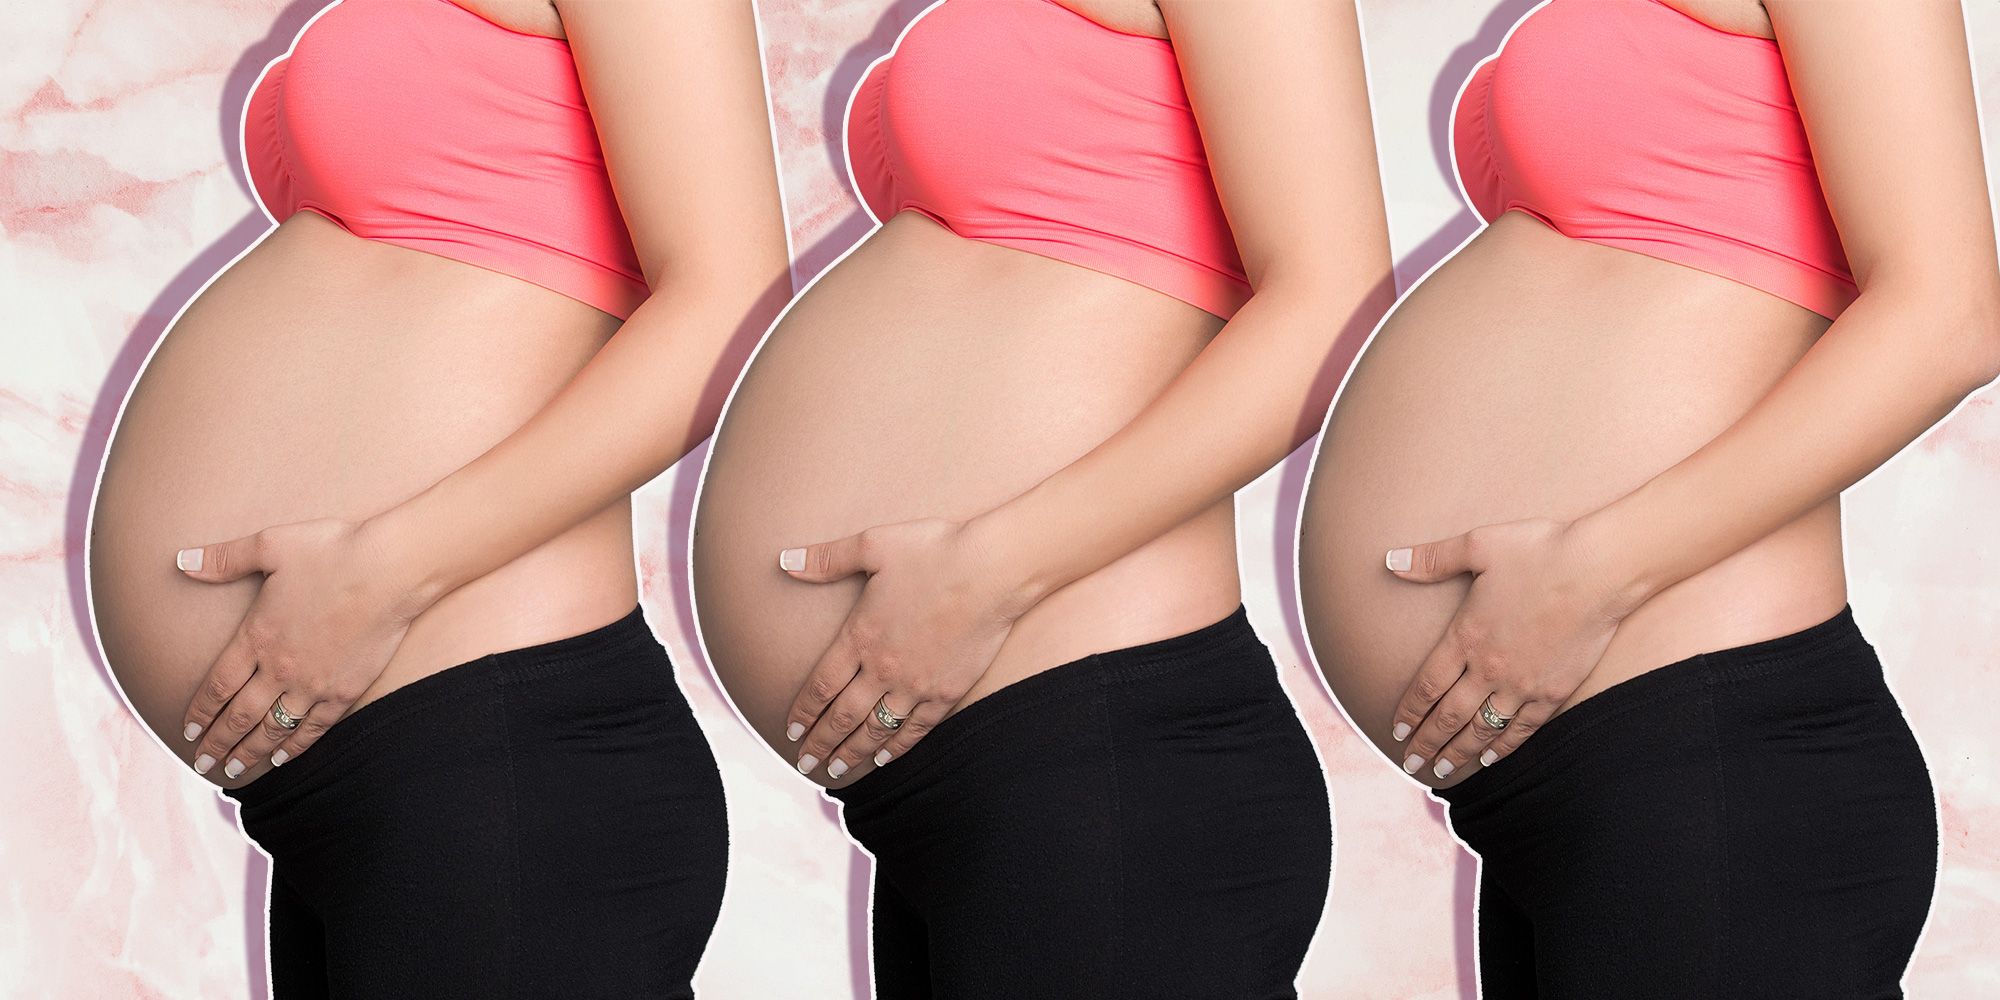 11 women share the one thing nobody told them could happen during pregnancy